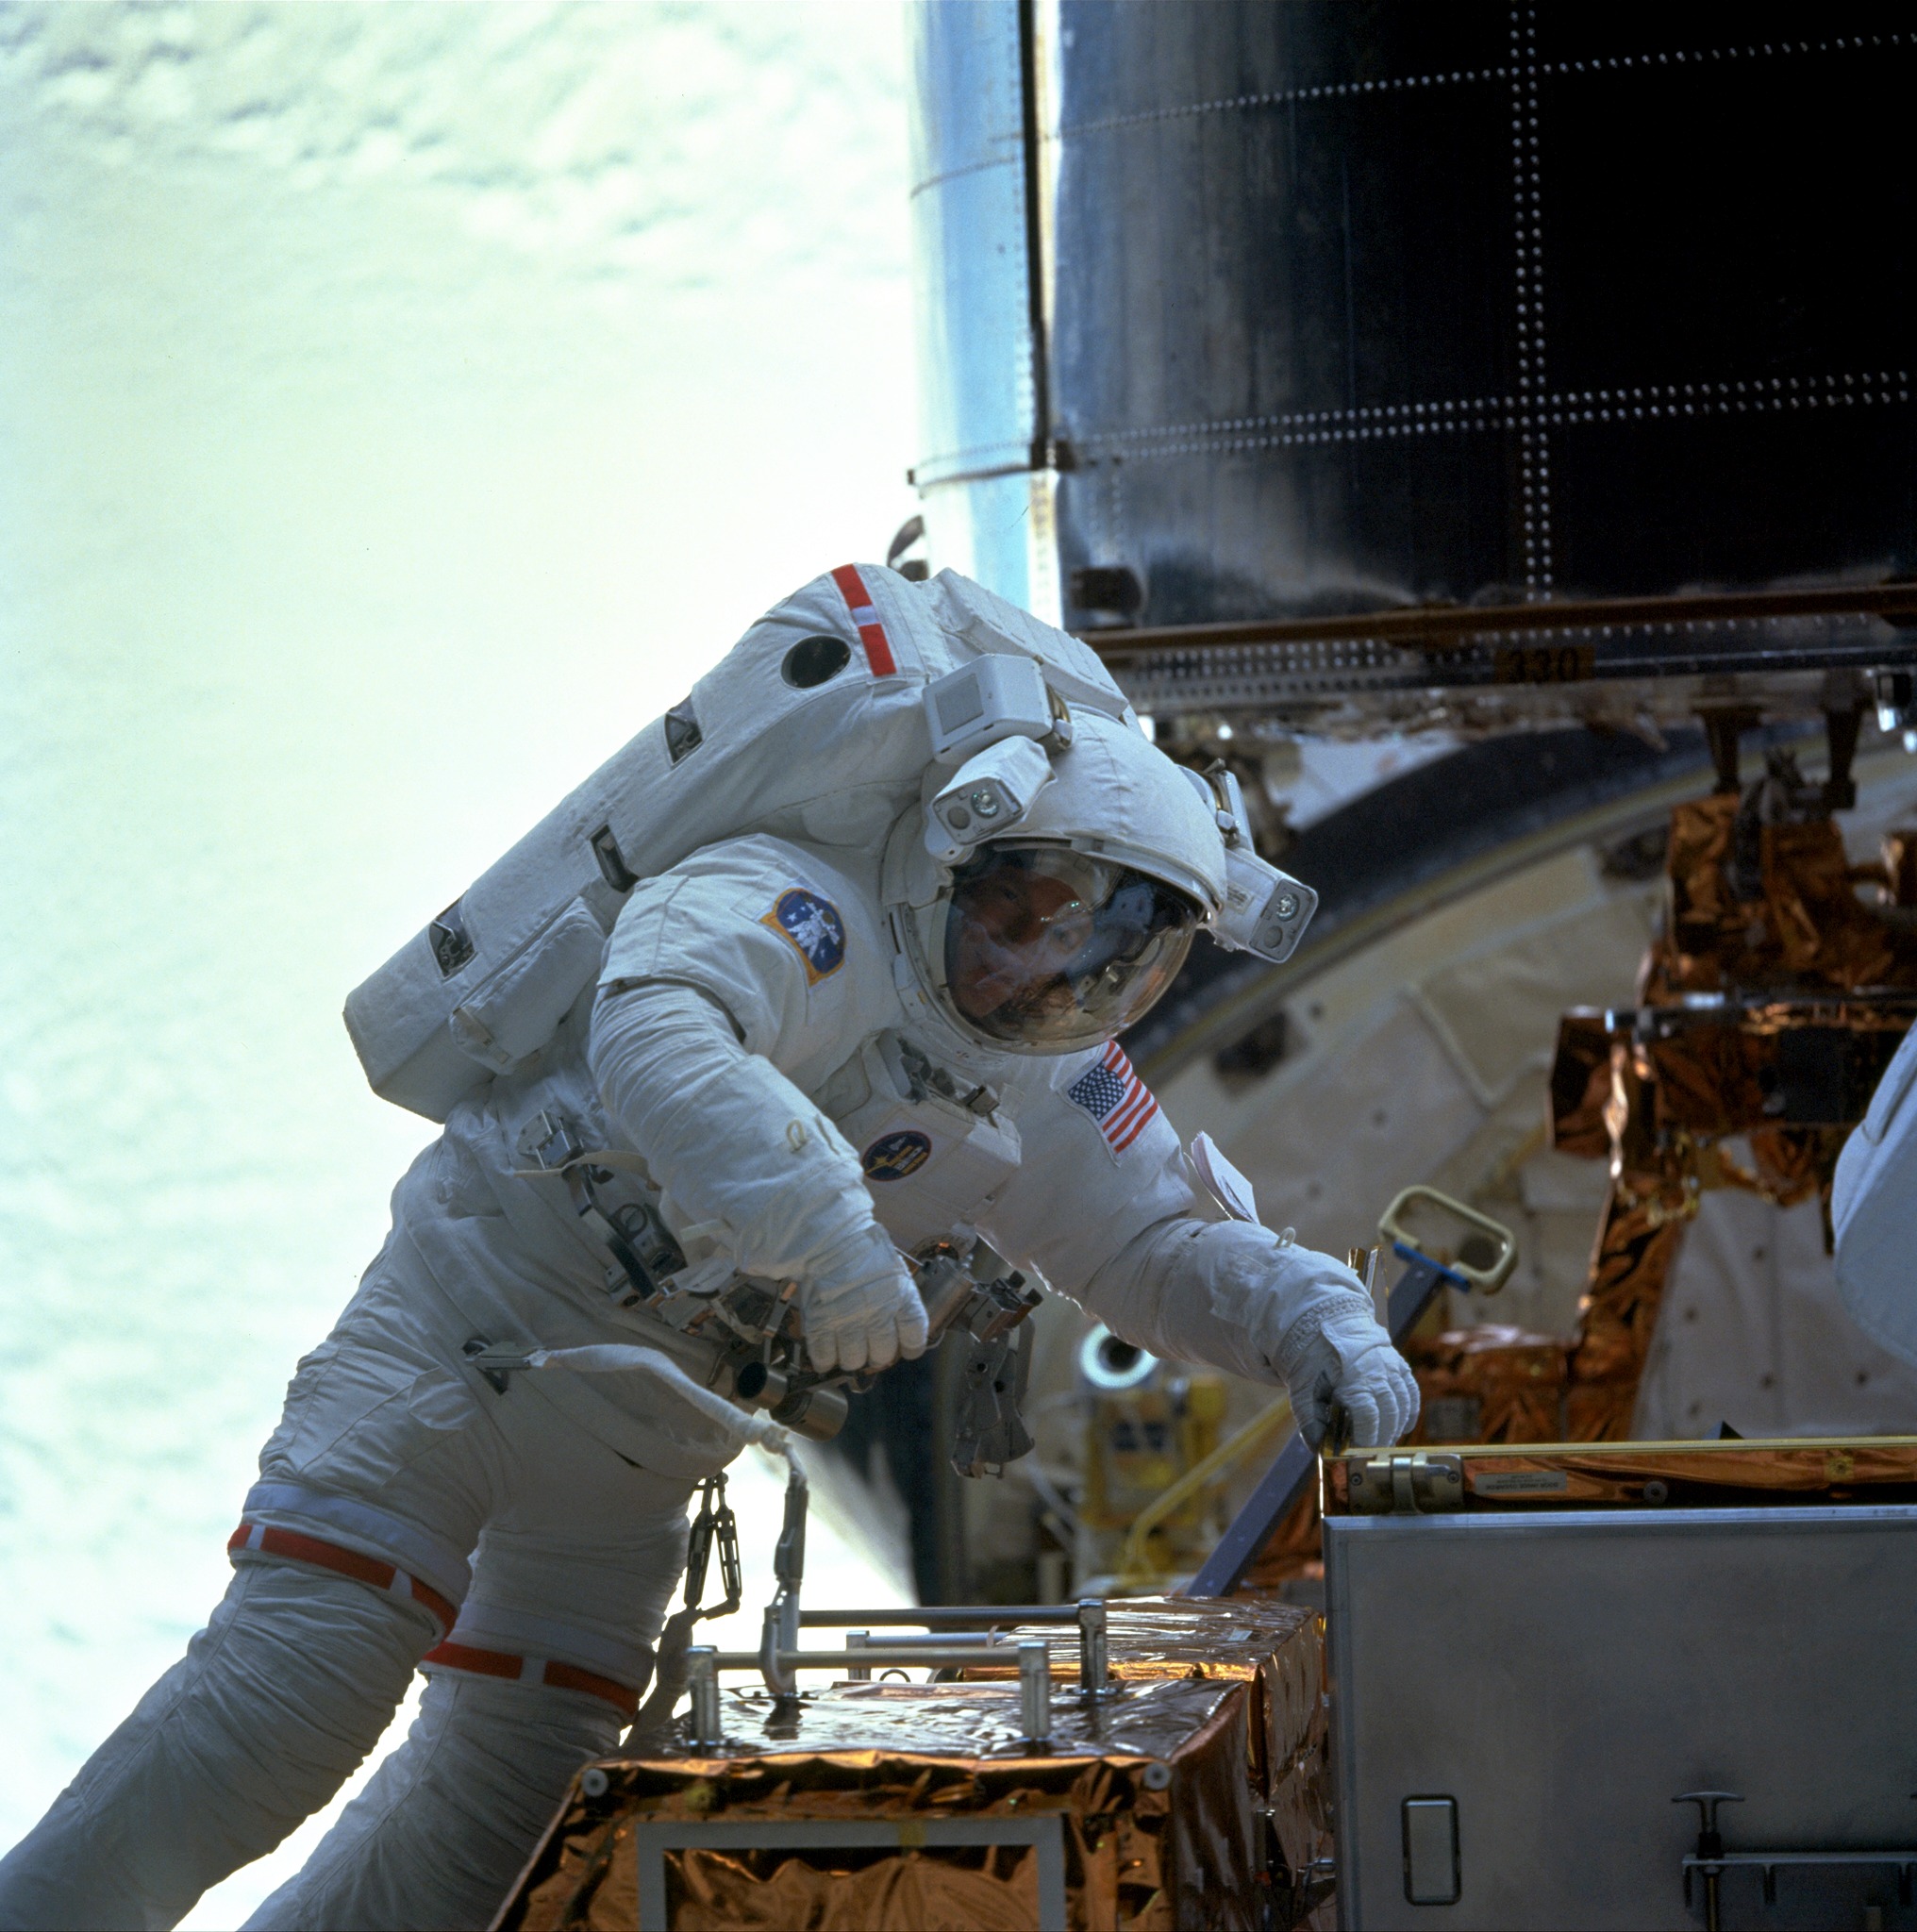 Mike Foale works on the Hubble Space Telescope during the STS-103 servicing mission in December 1999. This was the first and only Shuttle flight to remain in orbit over Christmas. Photo Credit: NASA